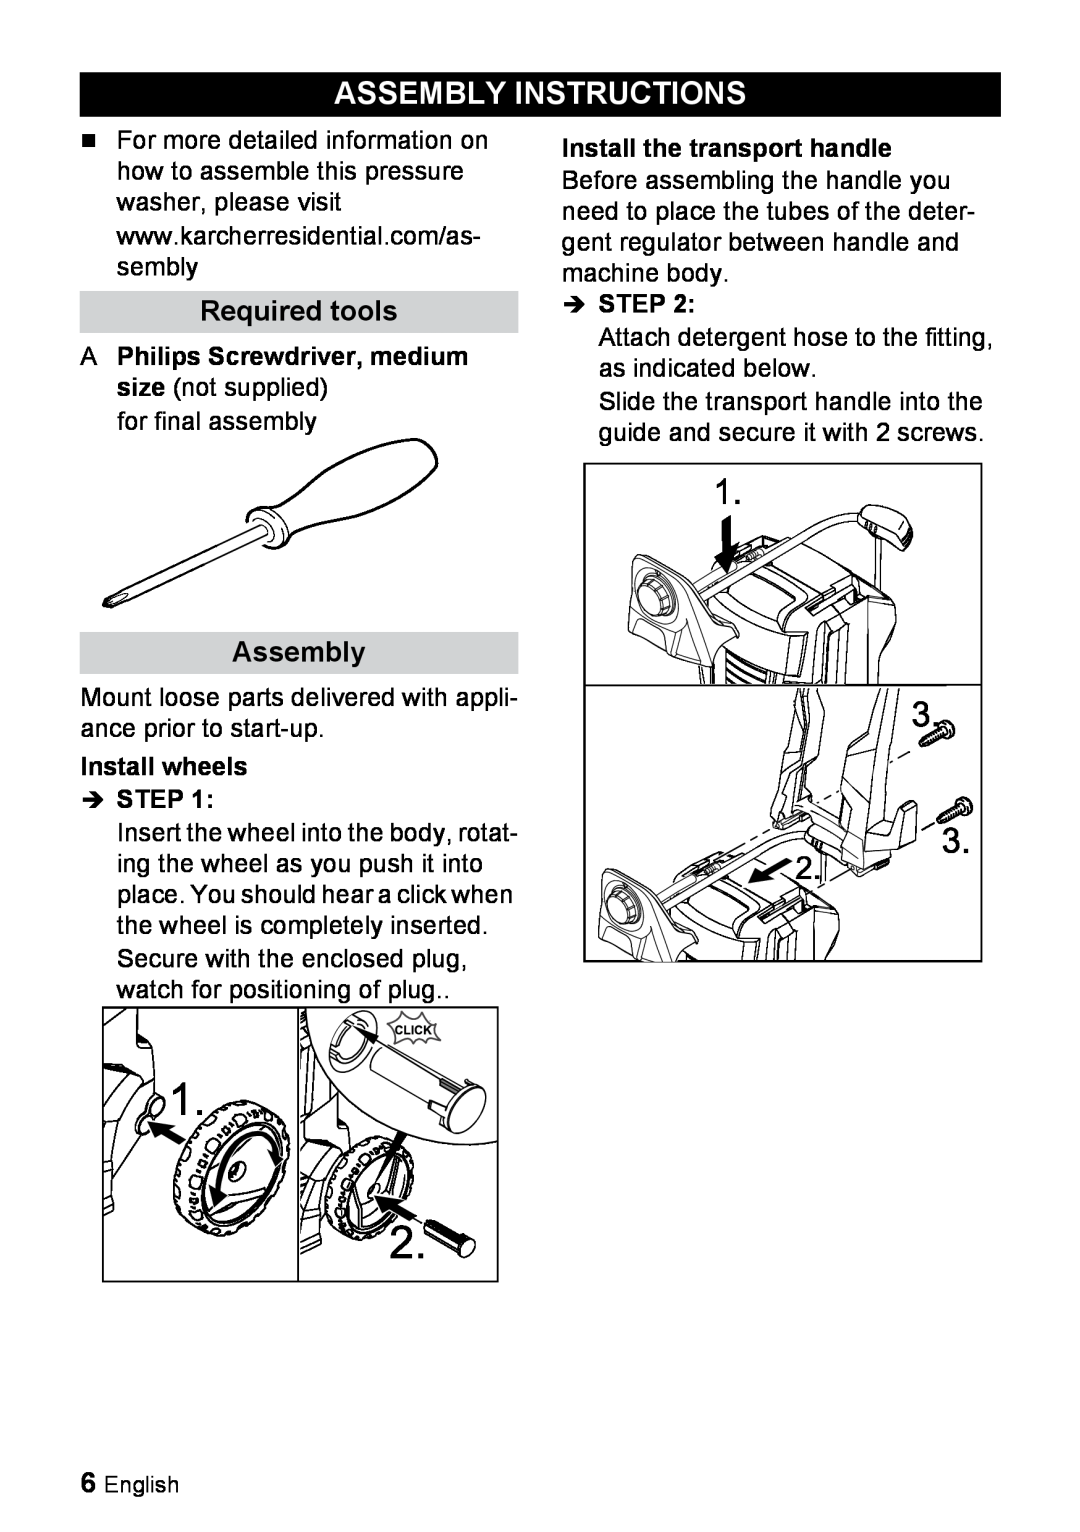 Karcher K 3.540 Assembly Instructions, Required tools, APhilips Screwdriver, medium size not supplied, Step 